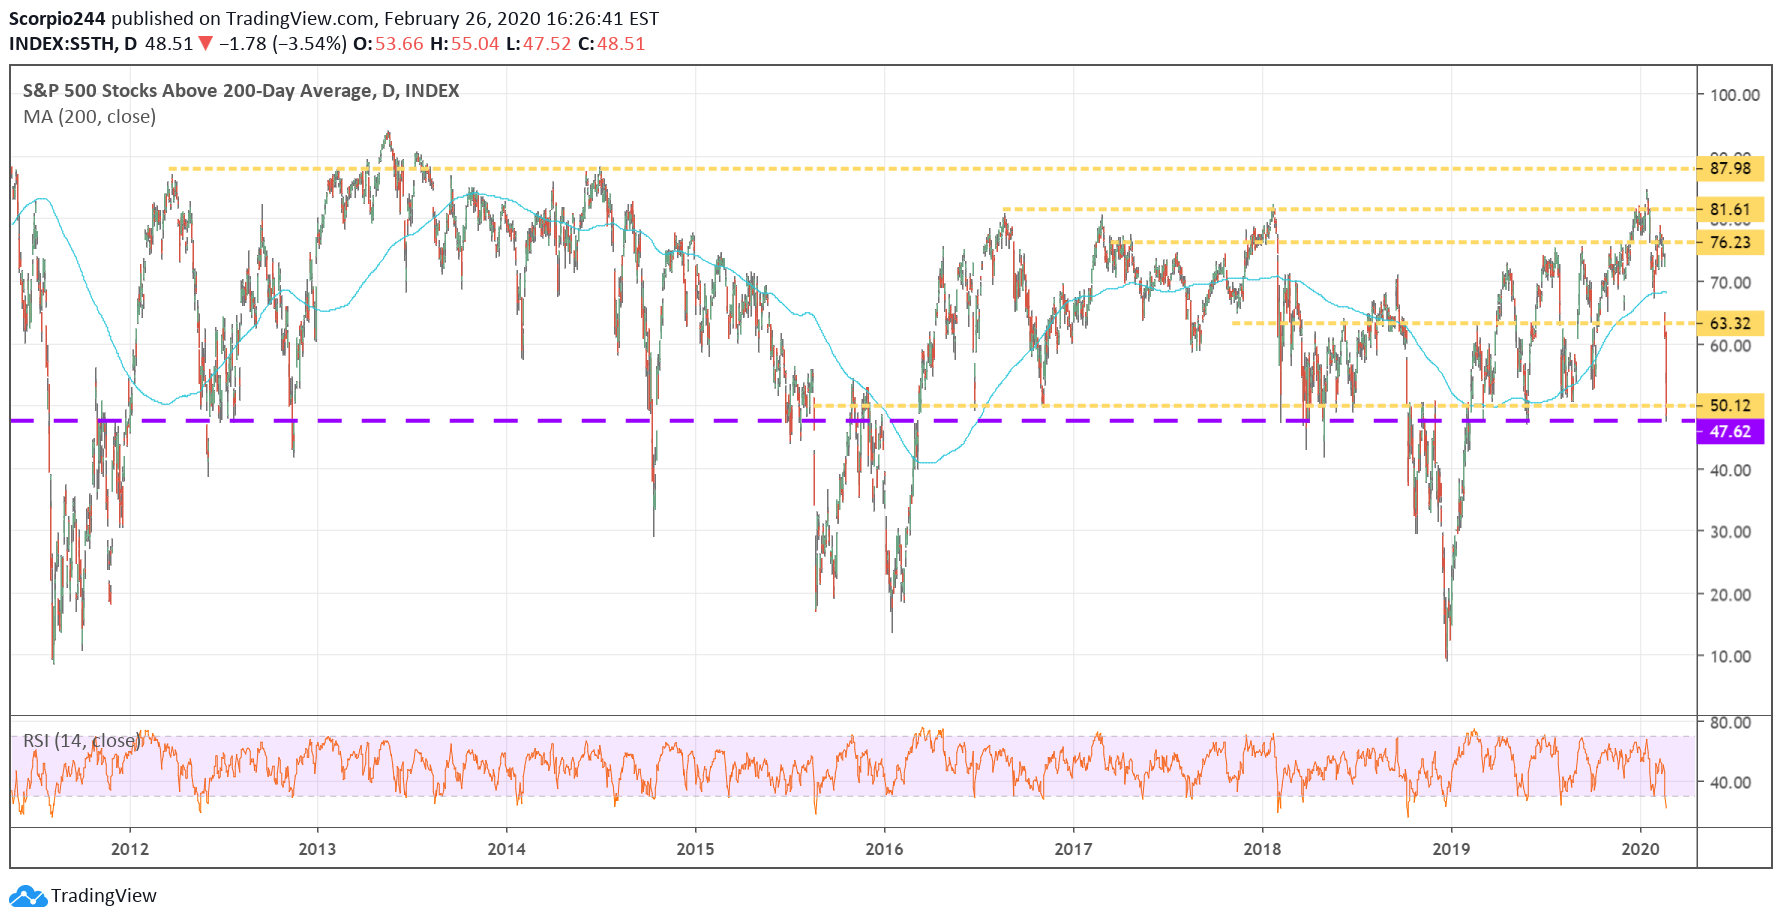 S&P 500 - Above 200 Day Average Chart